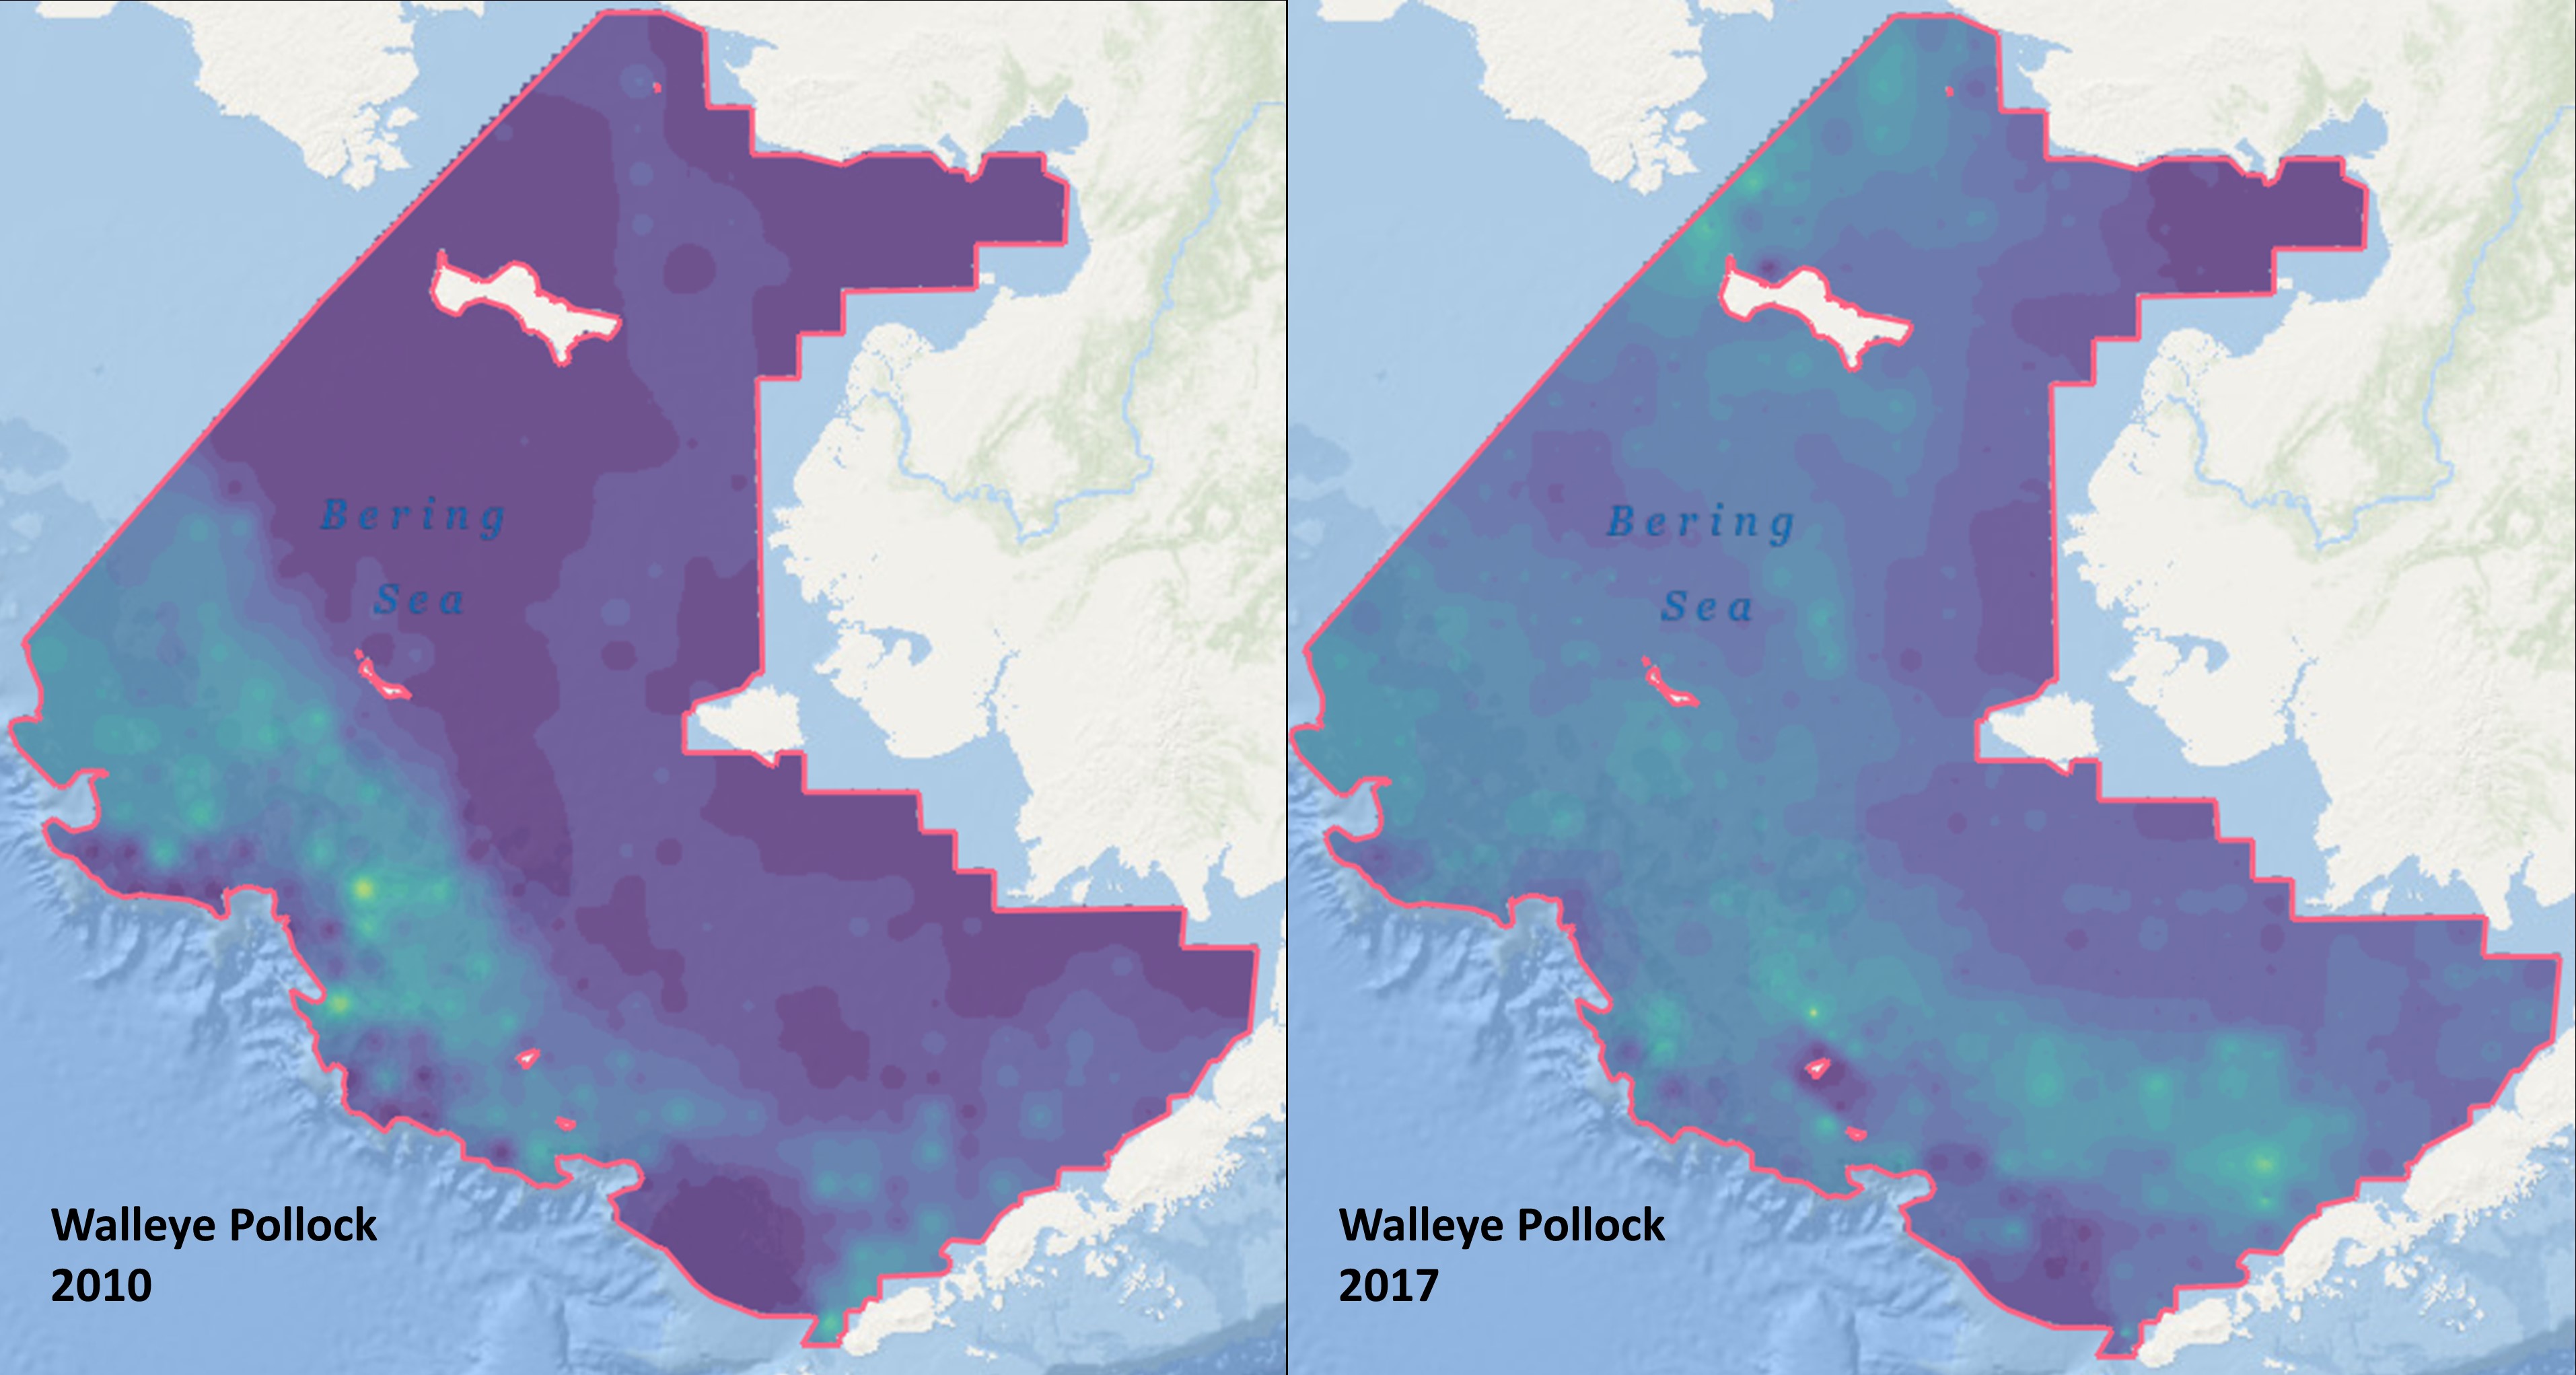 Two side-by-side maps of the eastern North Bering Sea. The map on the left is labeled "Walleye Pollock 2010" and most of the map area is purple with some green towards the bottom. The right map is labeled "Walleye Pollock 2017" and displays green throughout the map with a little purple.